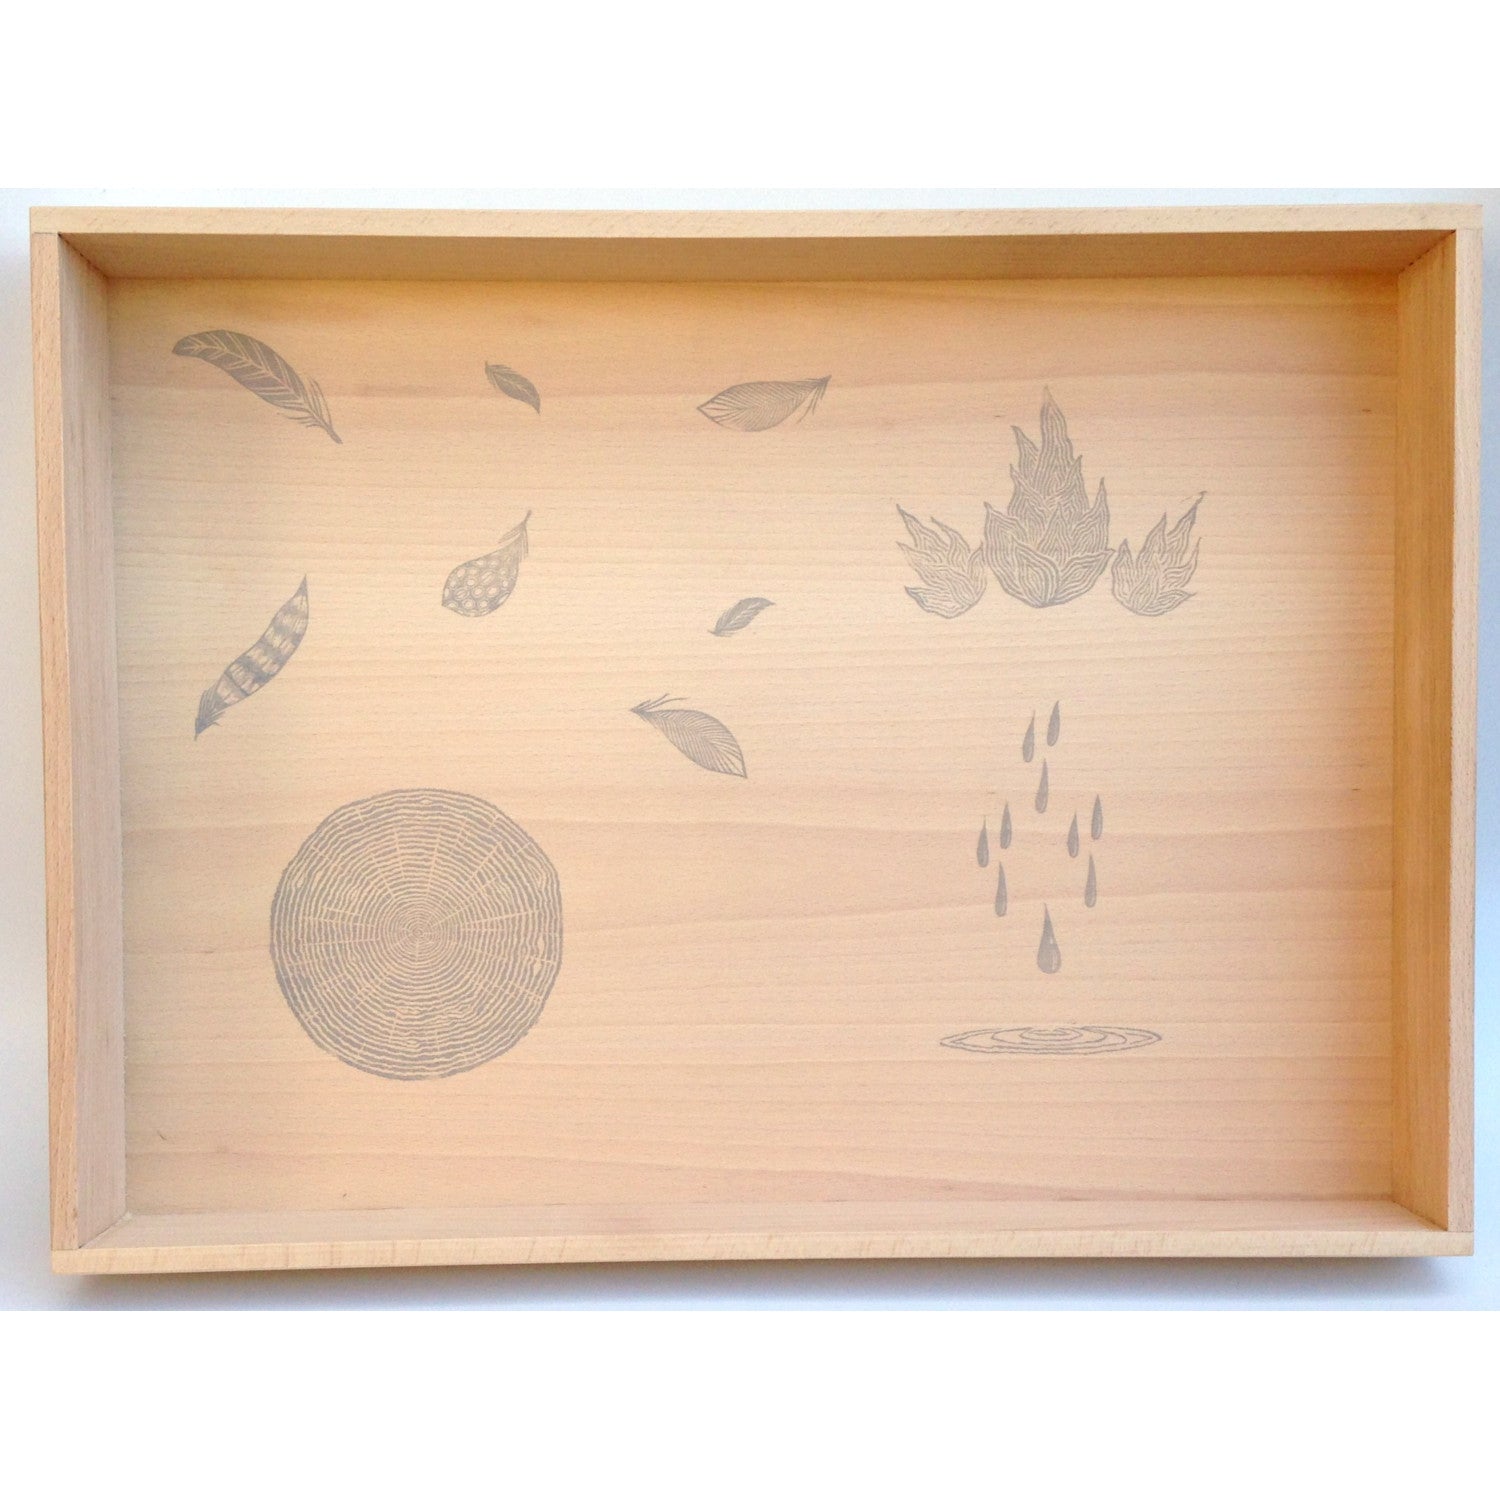 wooden tray for imaginative play for children add tactile items to create a sensory area